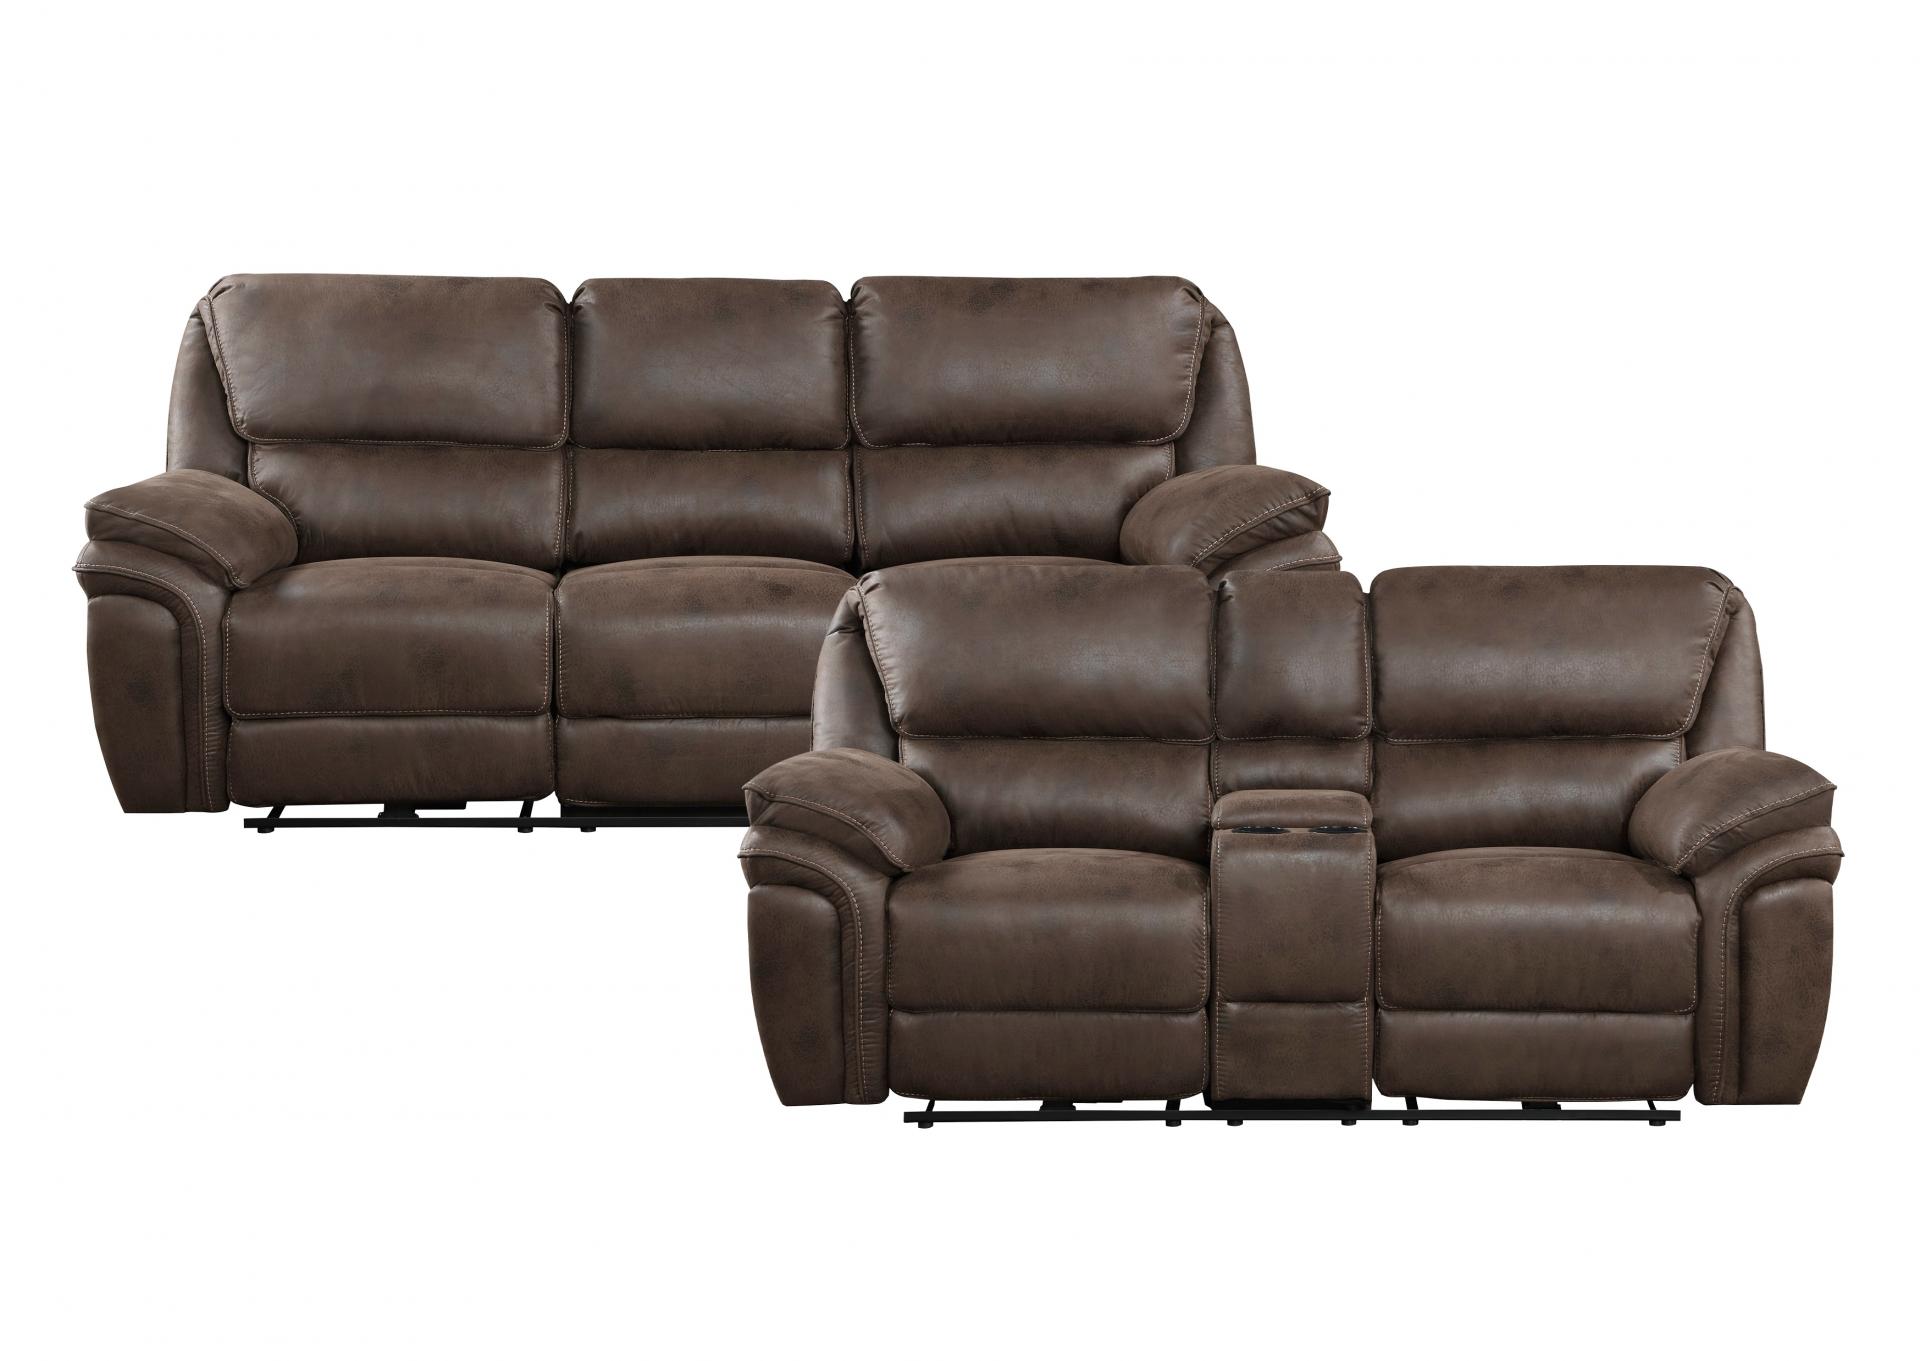 Proctor Power Double Reclining Sofa in Brown,Homelegance